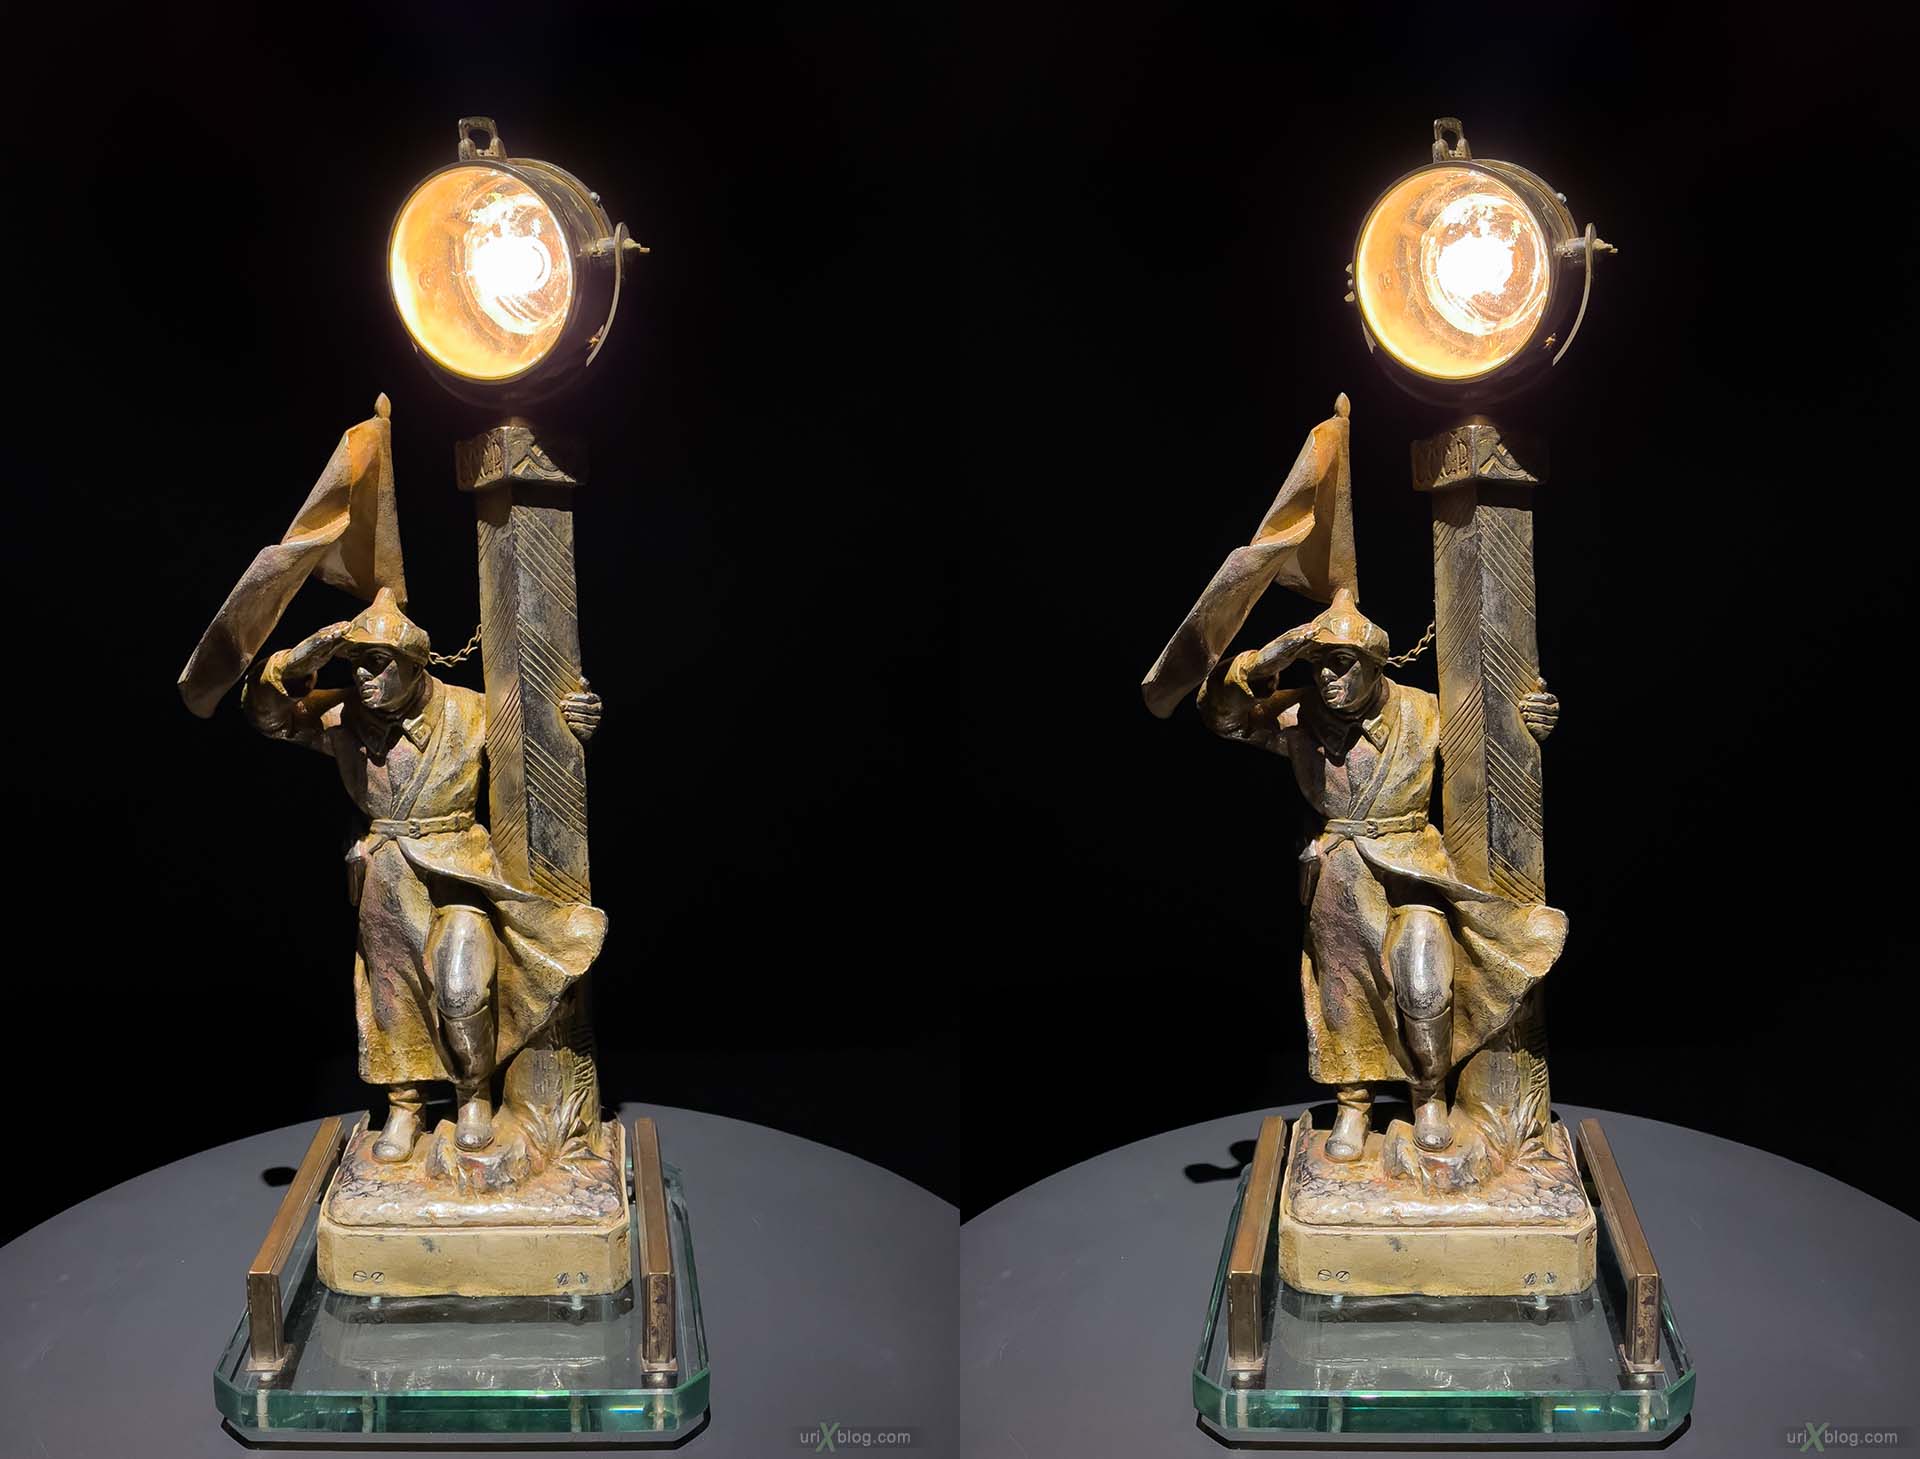 USSR, soviet, lamp, electrification, worker, statuette, Moscow, Russia, Museum of Moscow, 3D, stereo pair, cross-eyed, crossview, cross view stereo pair, stereoscopic